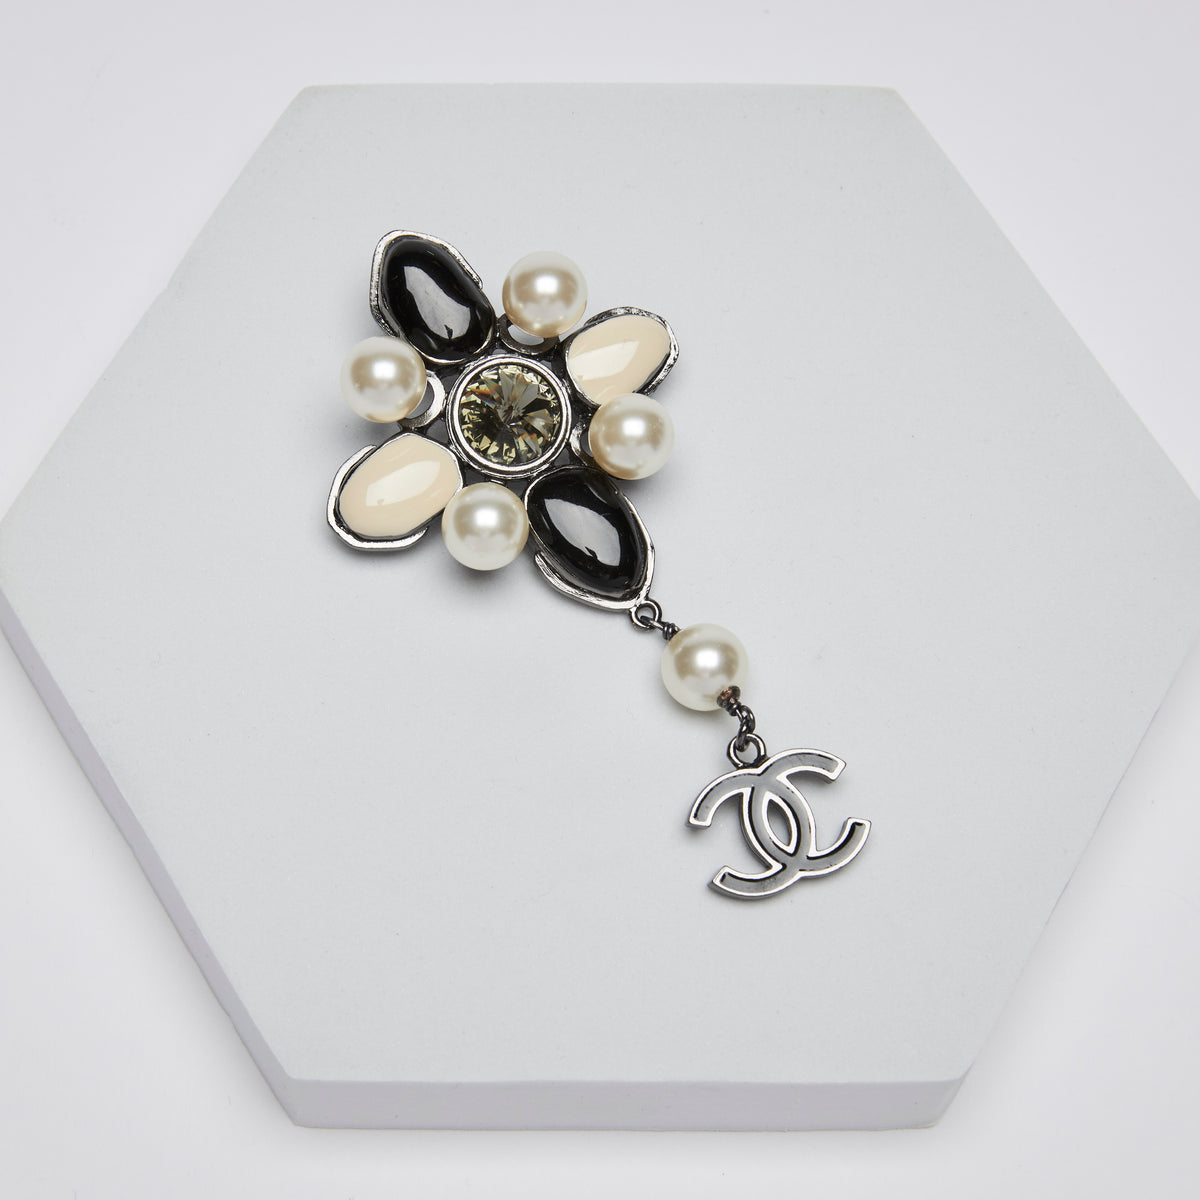 Excellent Pre-Loved Black/White Polished Stones and Glass Pearl Embellished Brooch with Dark Silver Tone Hardware and Black Enamel Logo Drop Pendant.  (front)